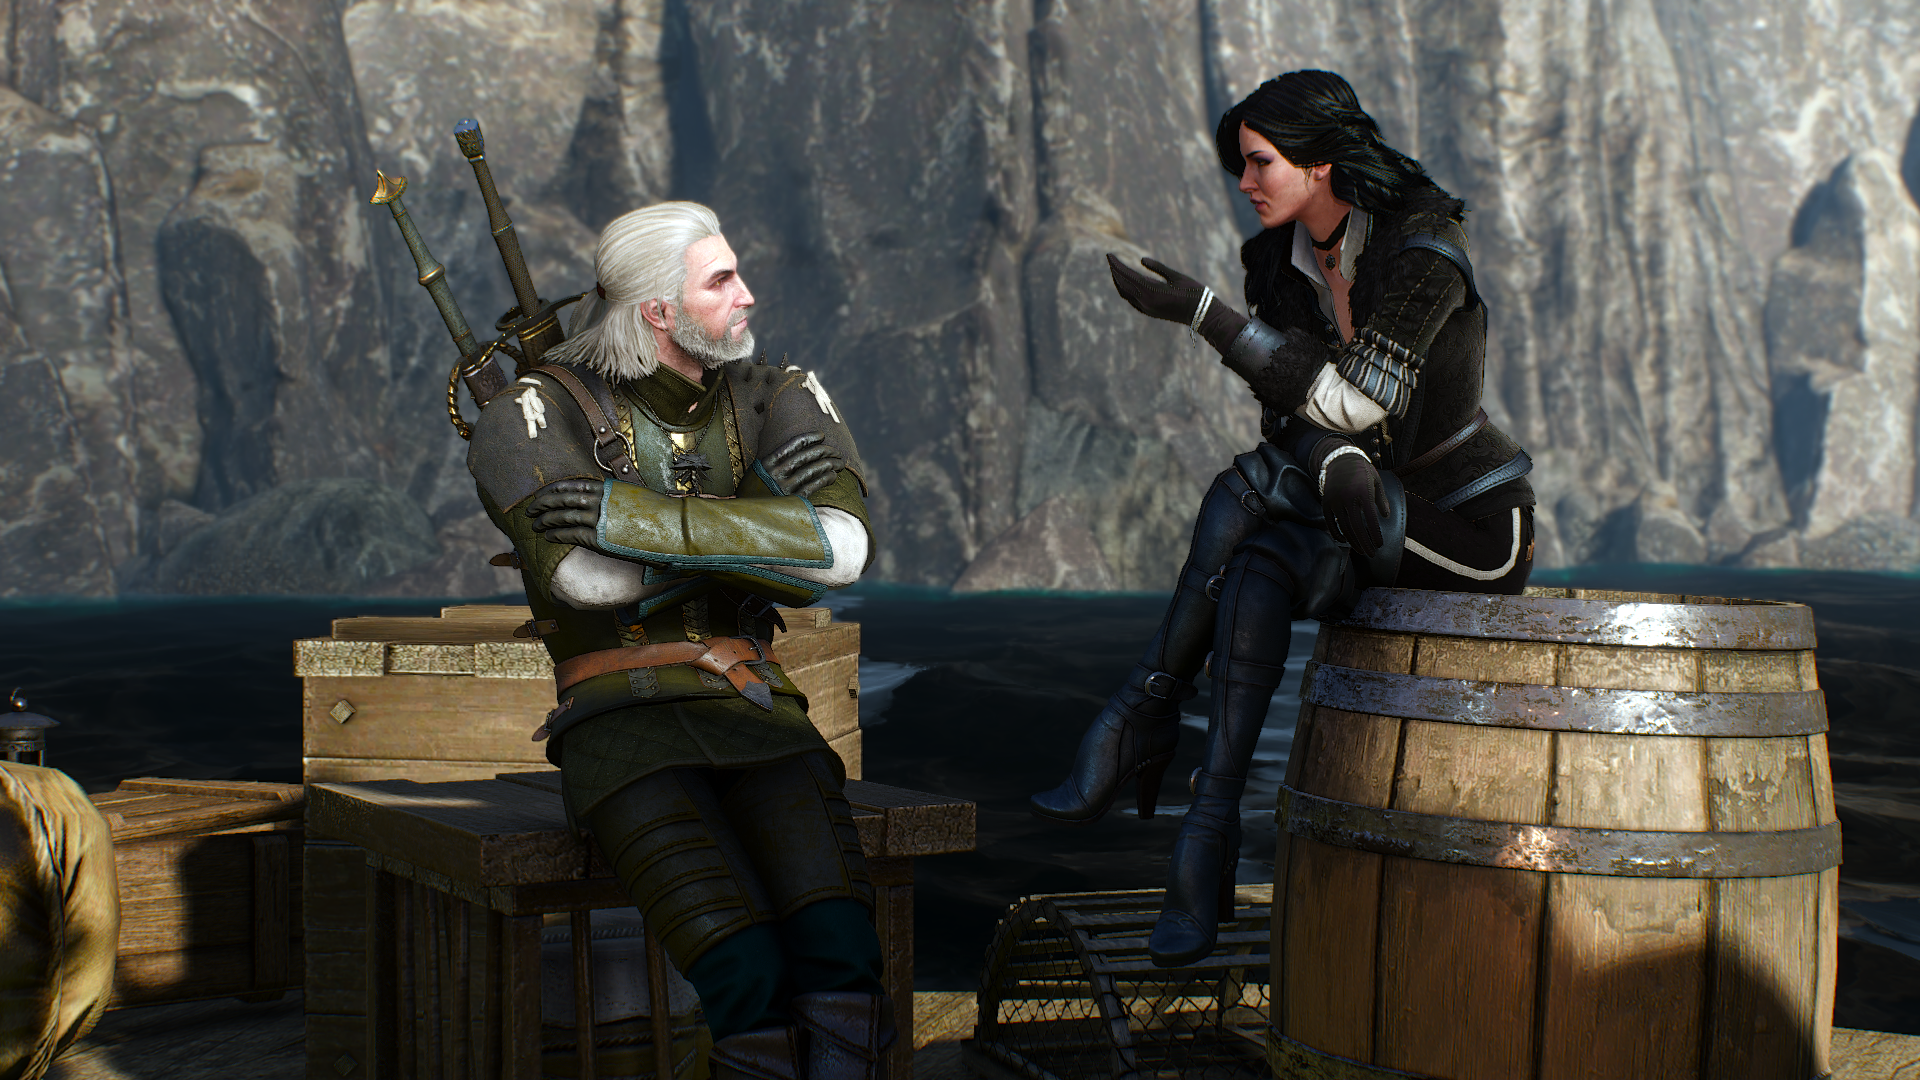 Geralt And Yennefer In The Witcher 4K Wallpapers